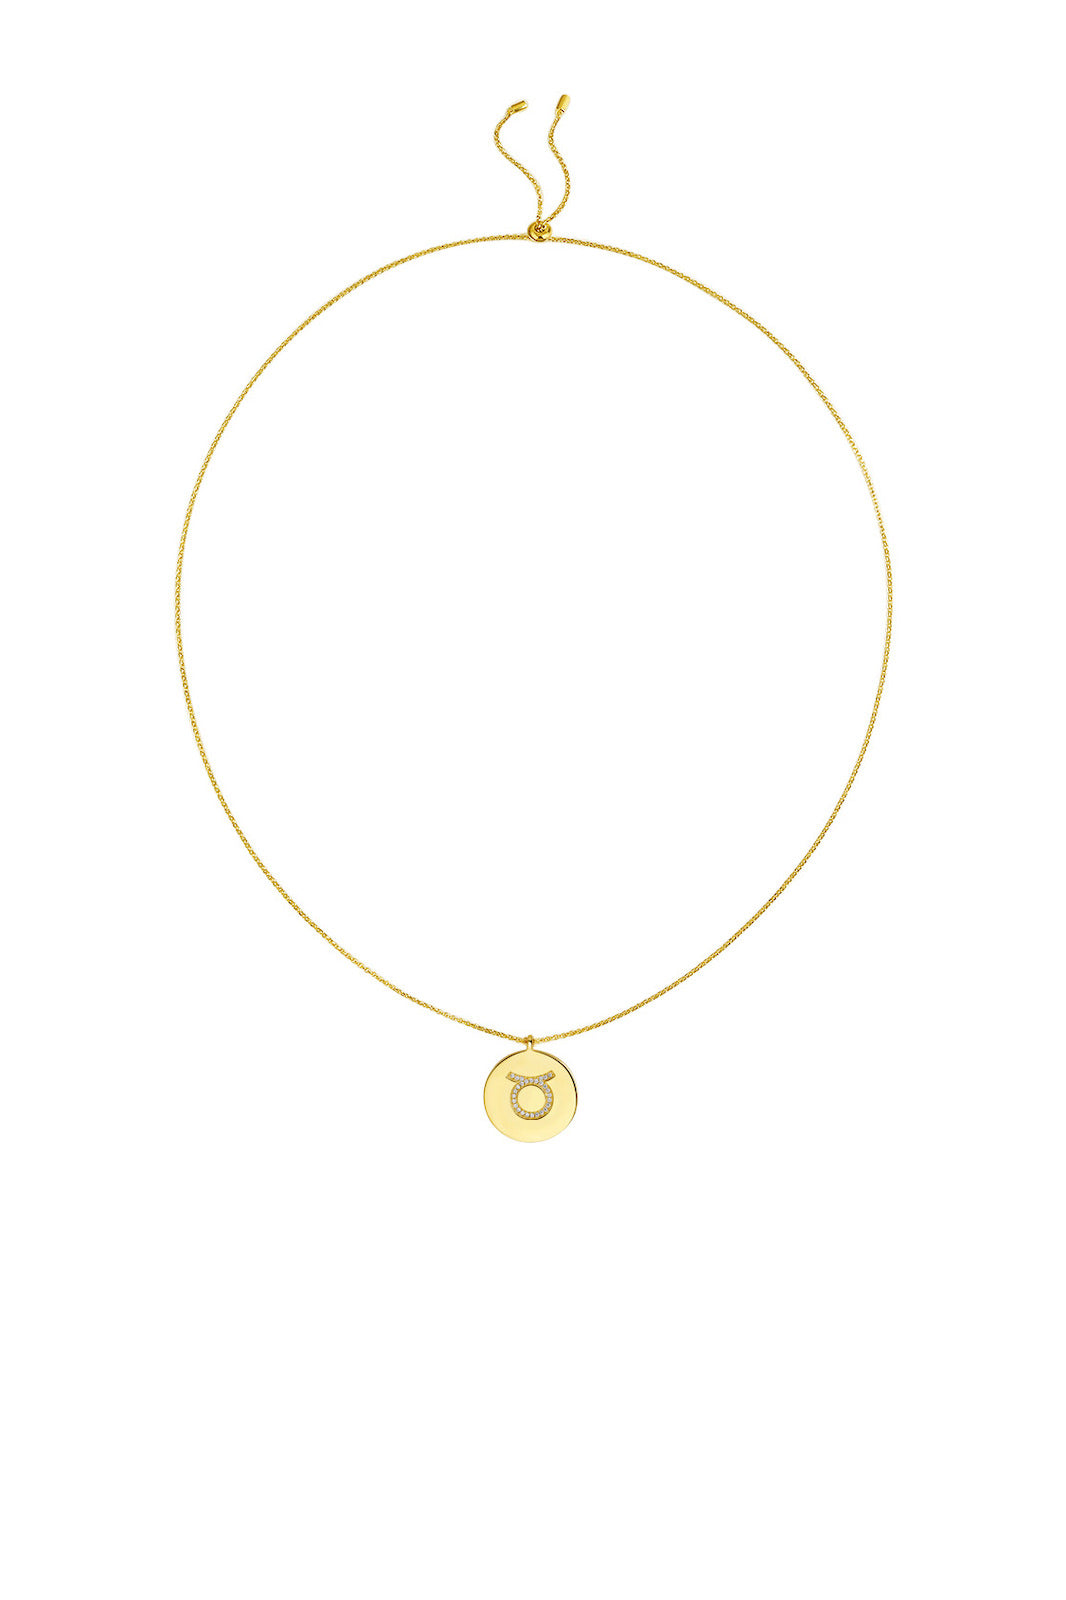 Gold Plated Silver Zodiac Necklace - Taurus Side View